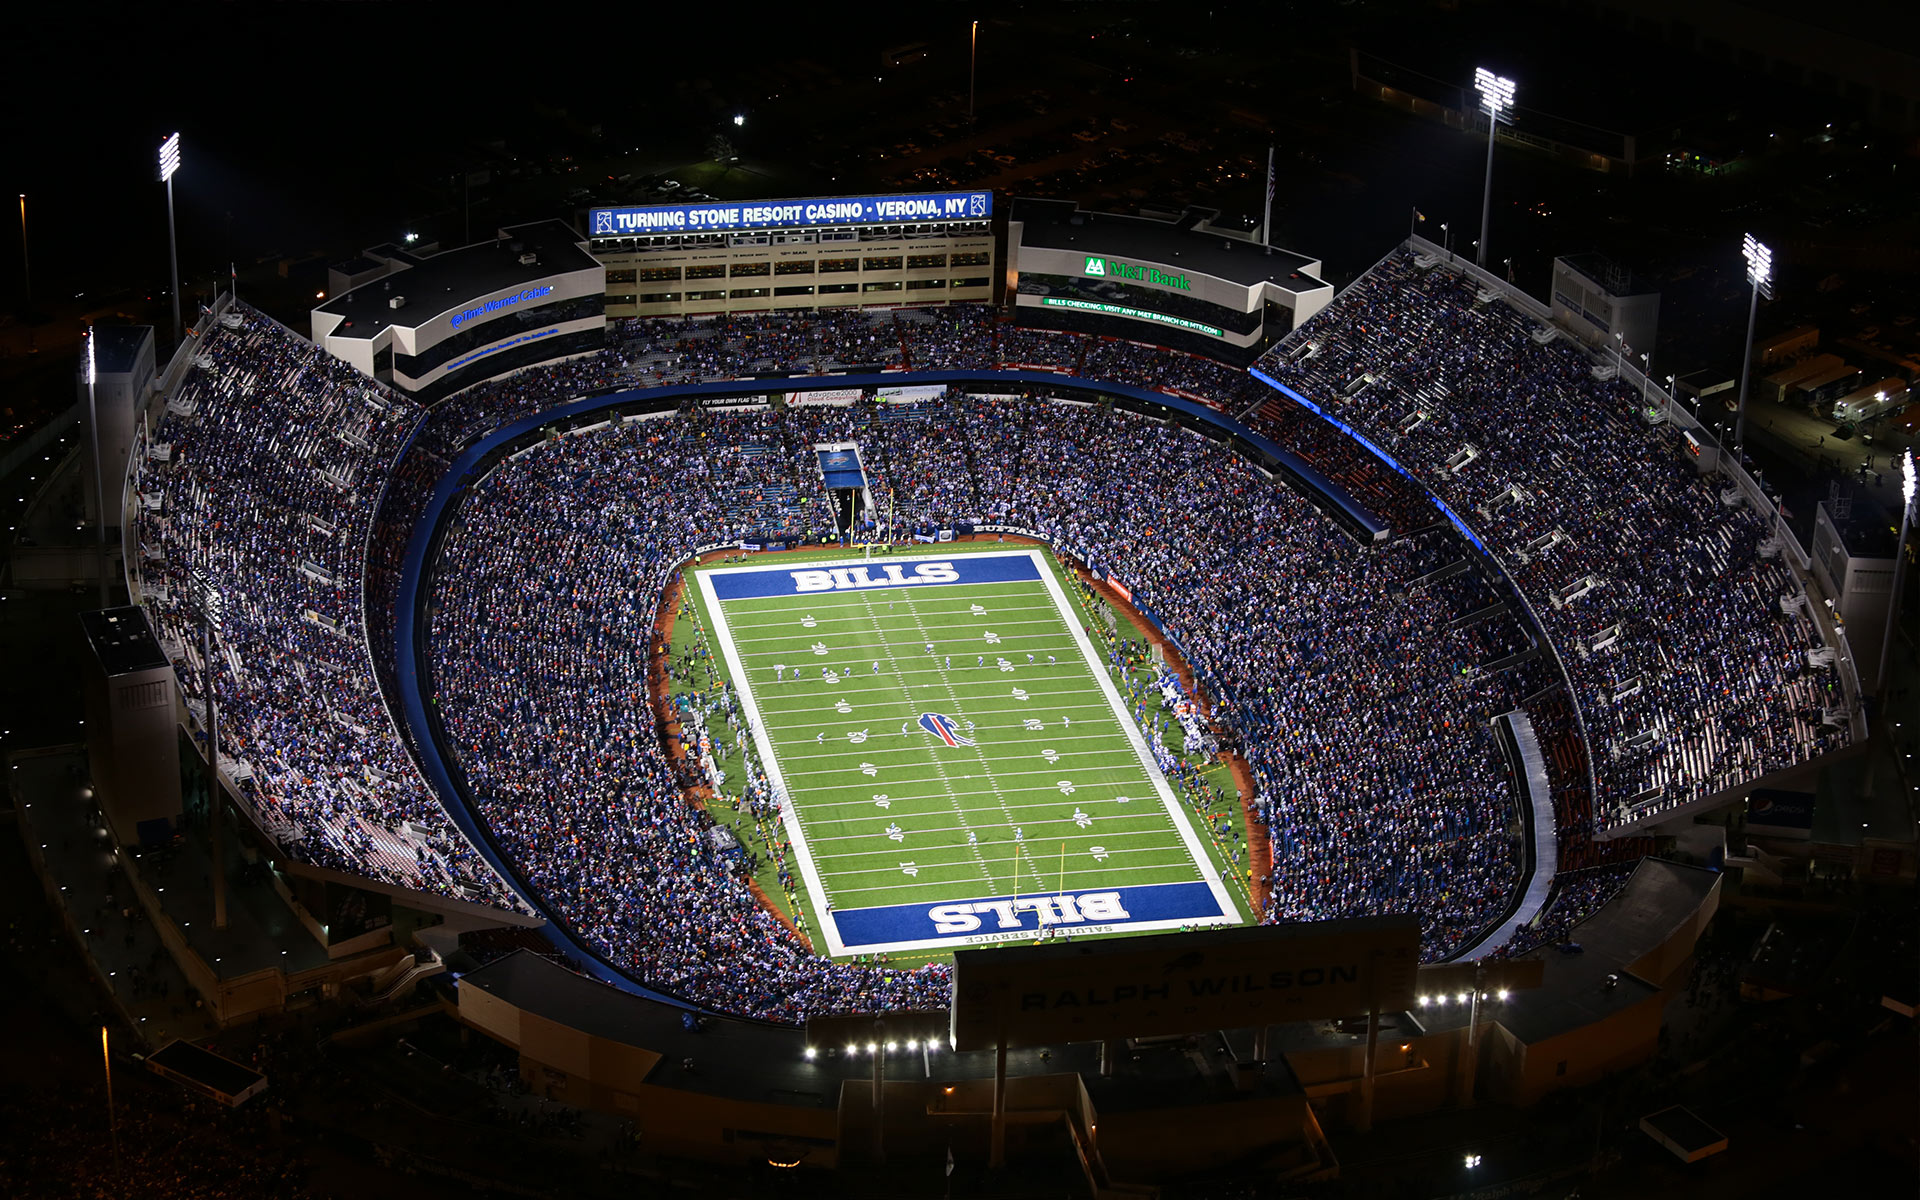 Nfl Football Stadium At Night Image Pictures Becuo